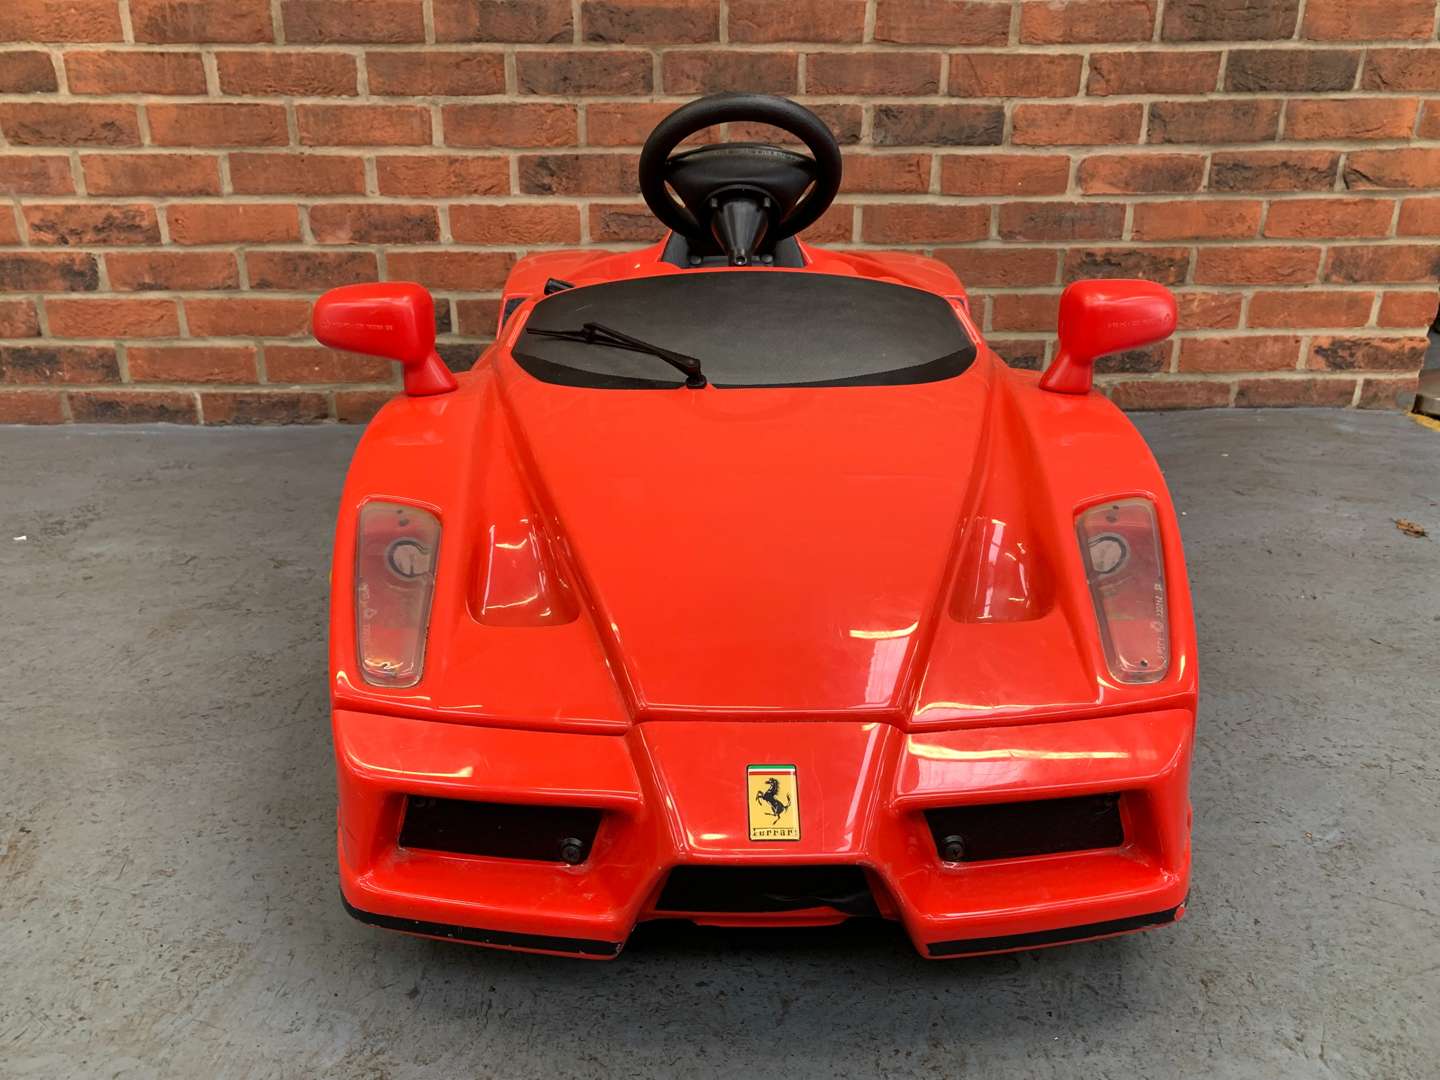 Toys Toys Battery Operated Childs Ferrari Enzo Car - Image 3 of 6